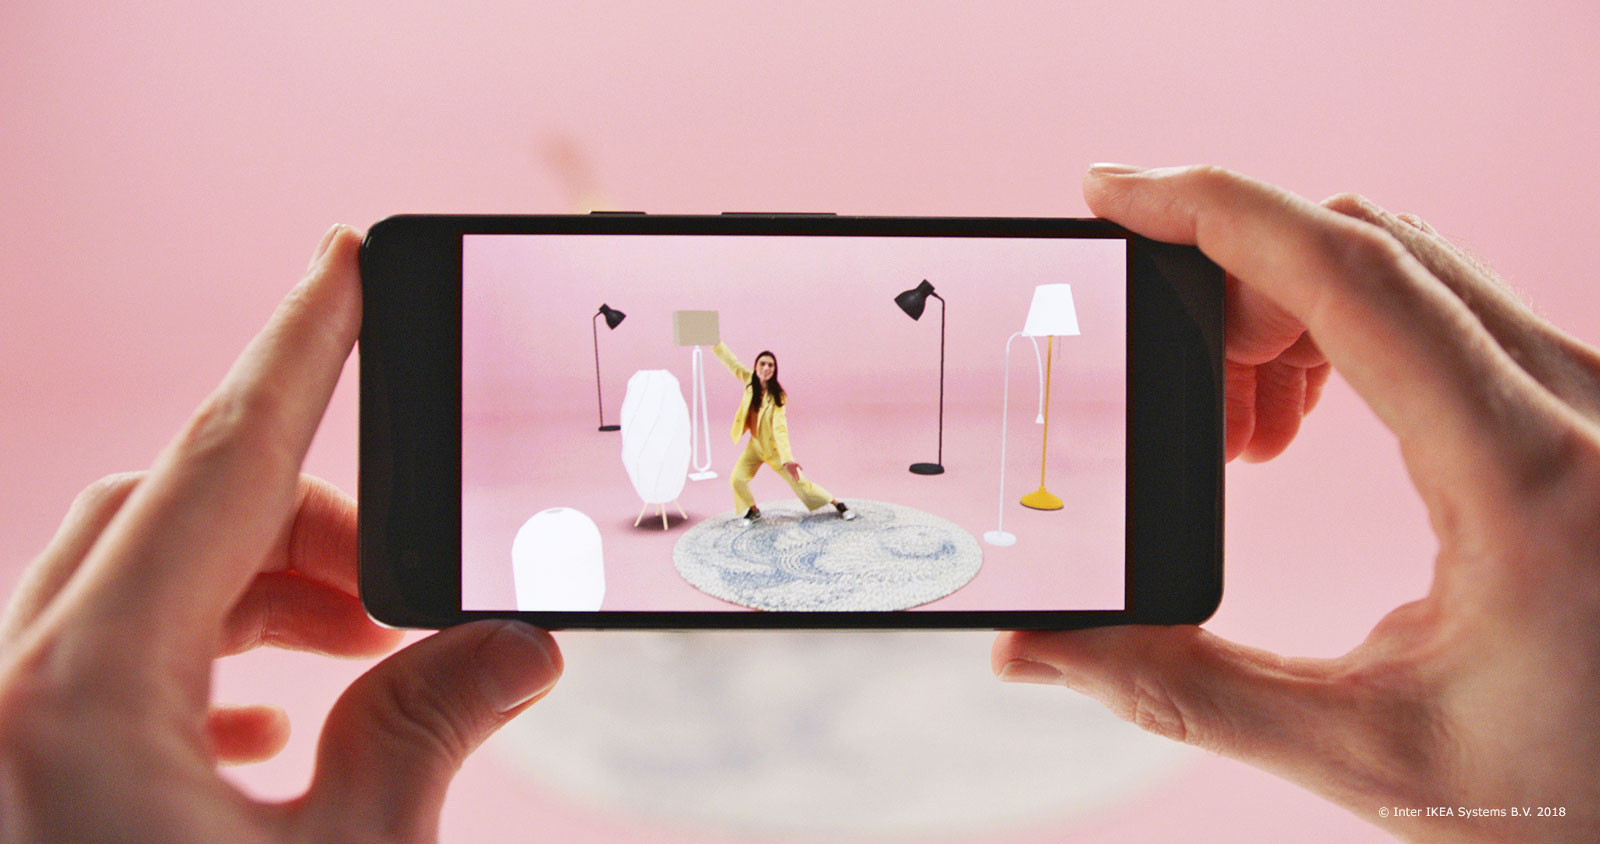 Ikea's Place app is now out for the latest Android phones